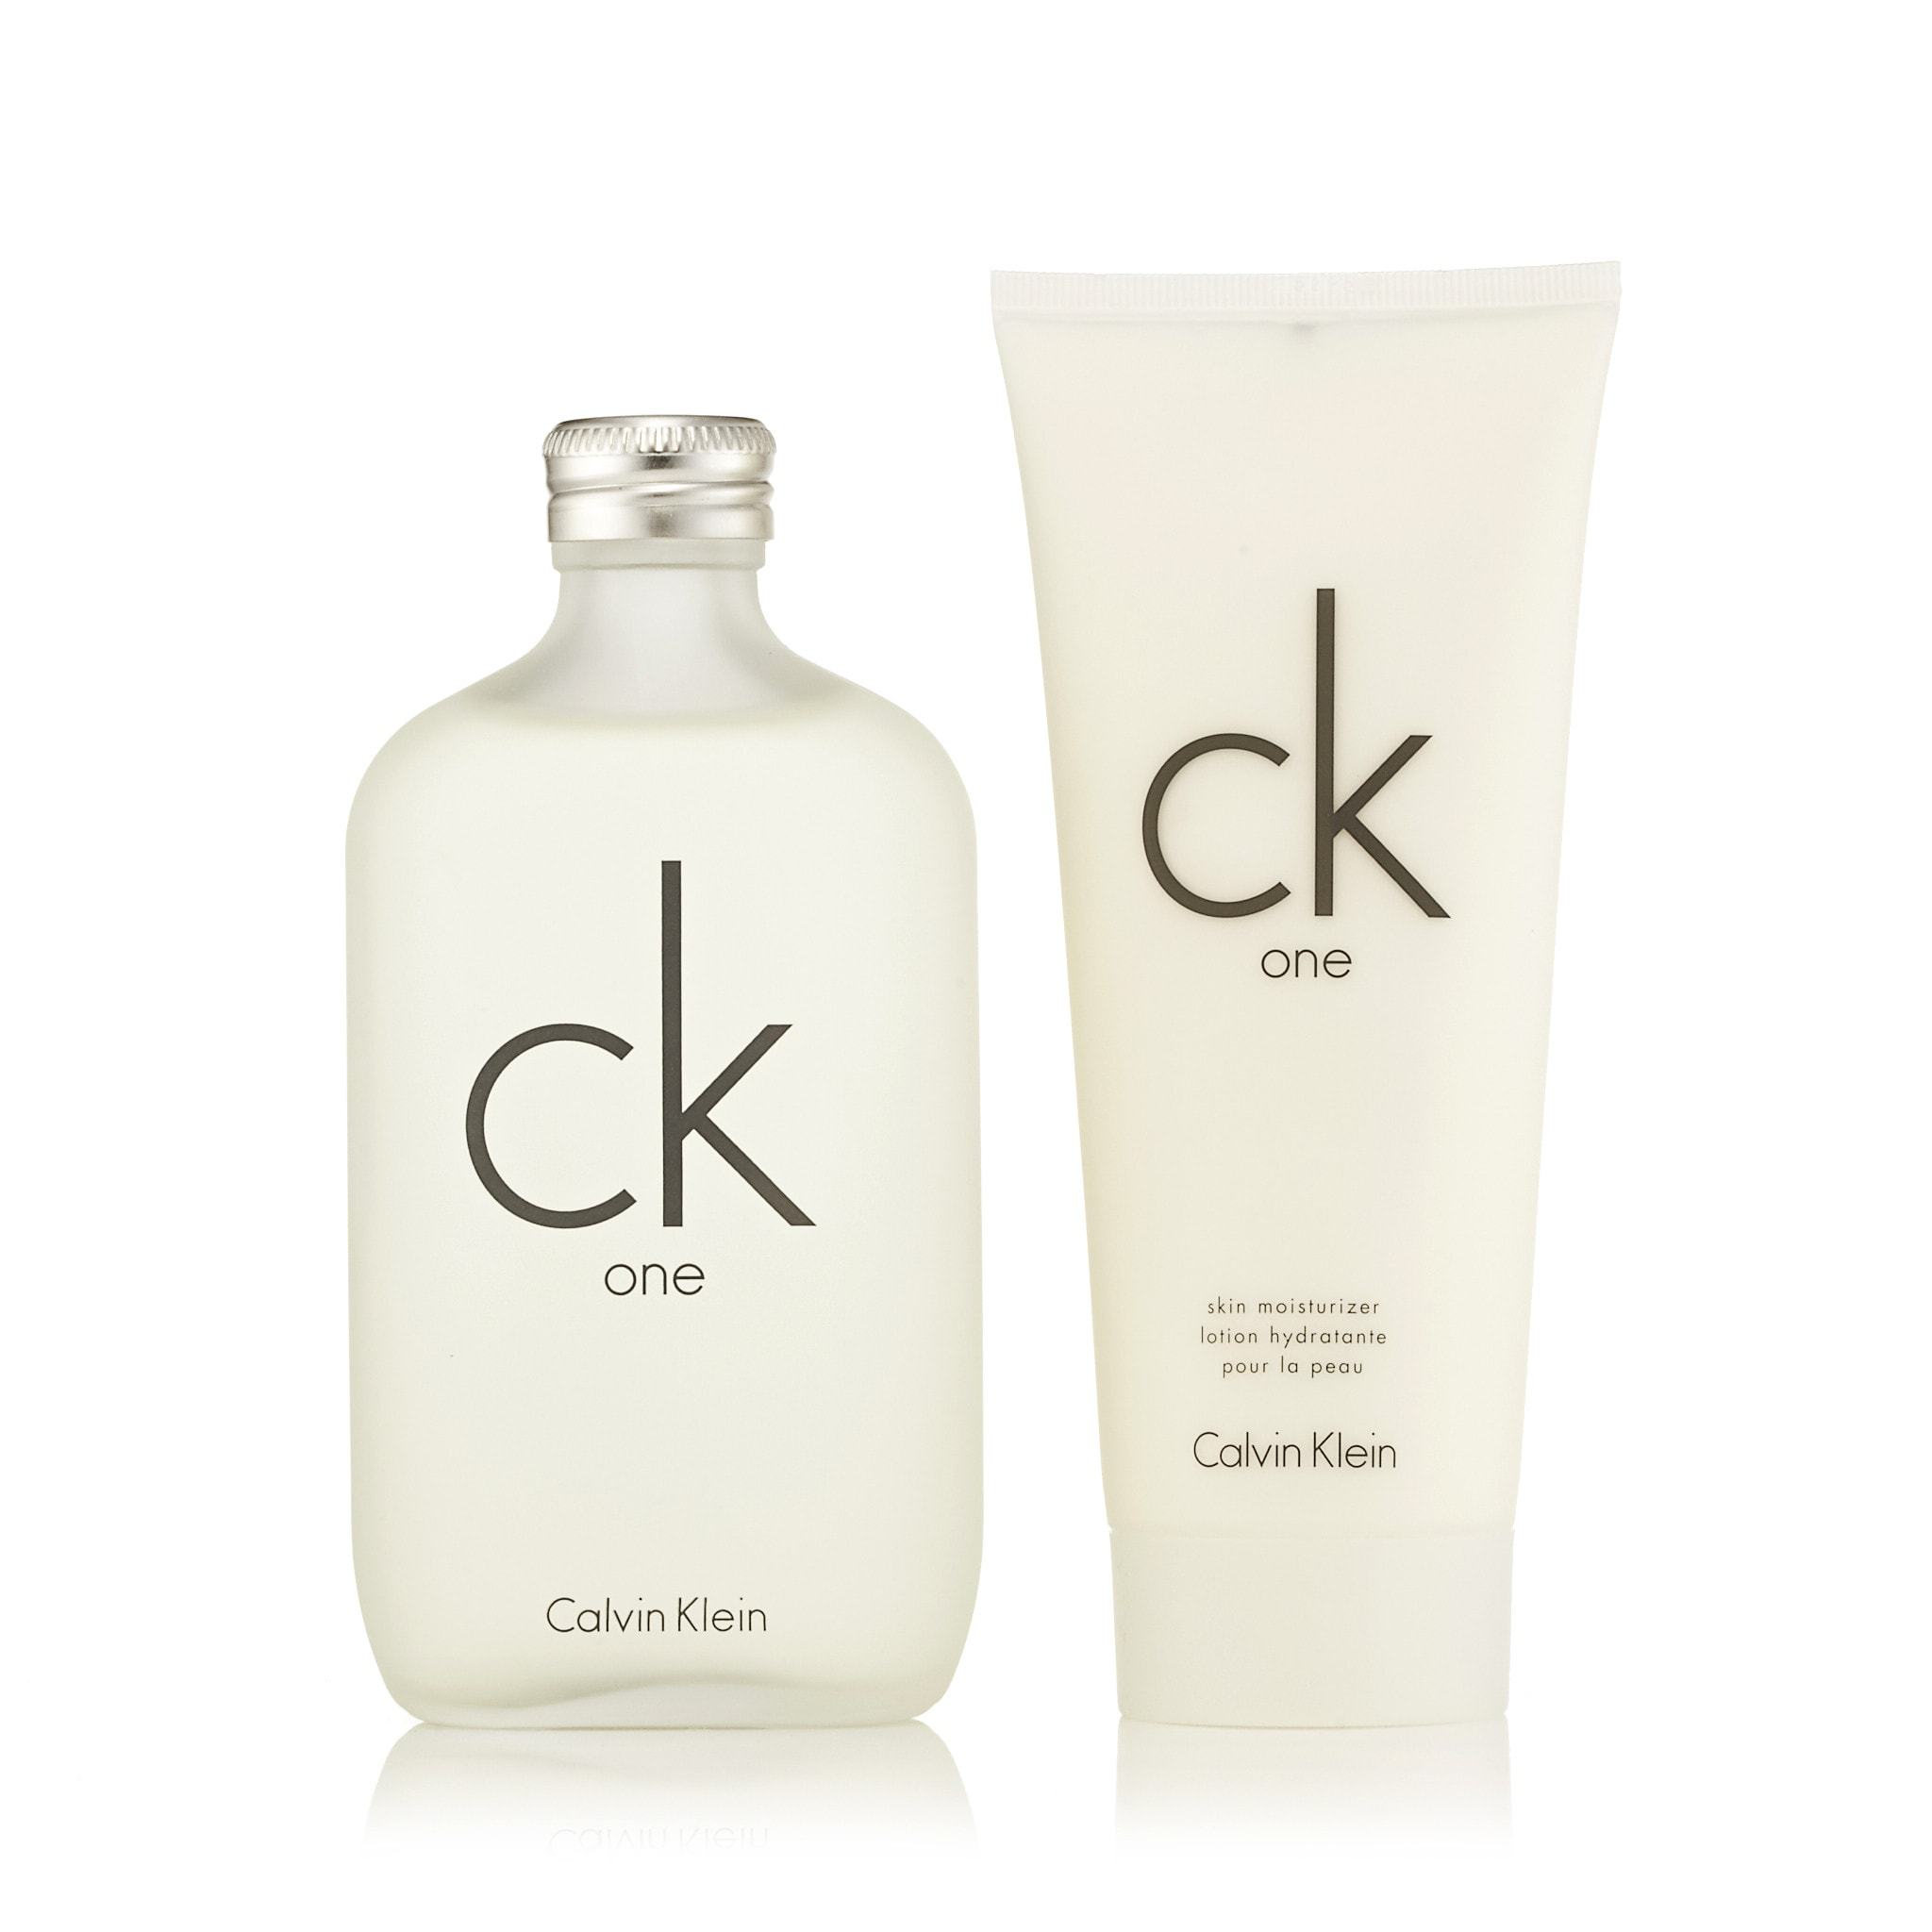 Skin One CK Women Men – EDT Set and Moisturizer K Fragrance Gift for by Outlet and Calvin